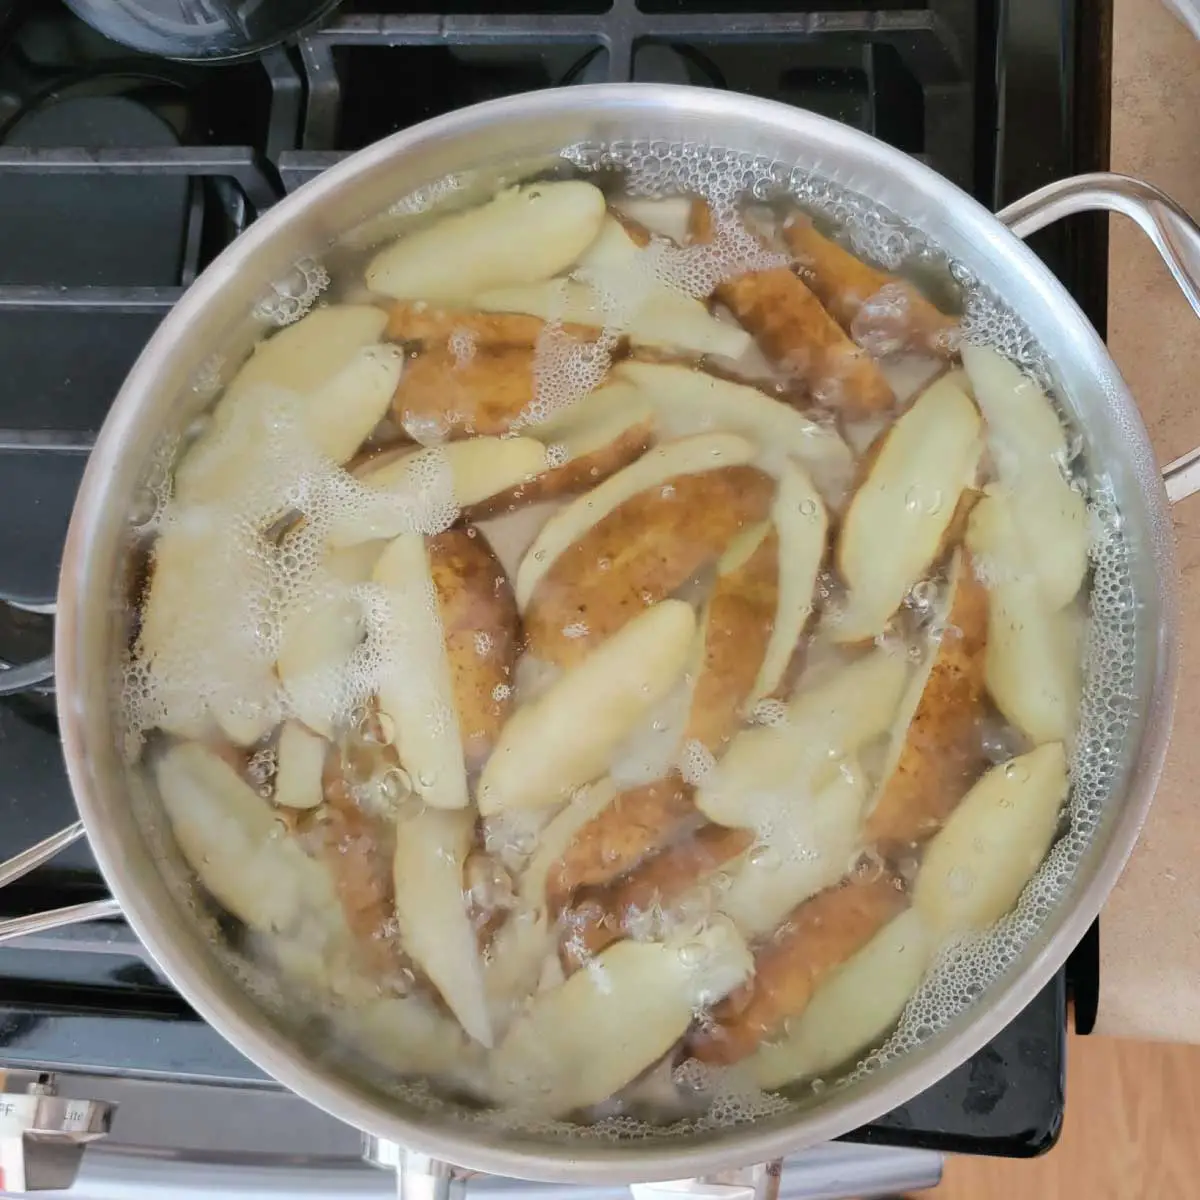 Potatoes cut into wedges and in a large frying pan with water cooking.